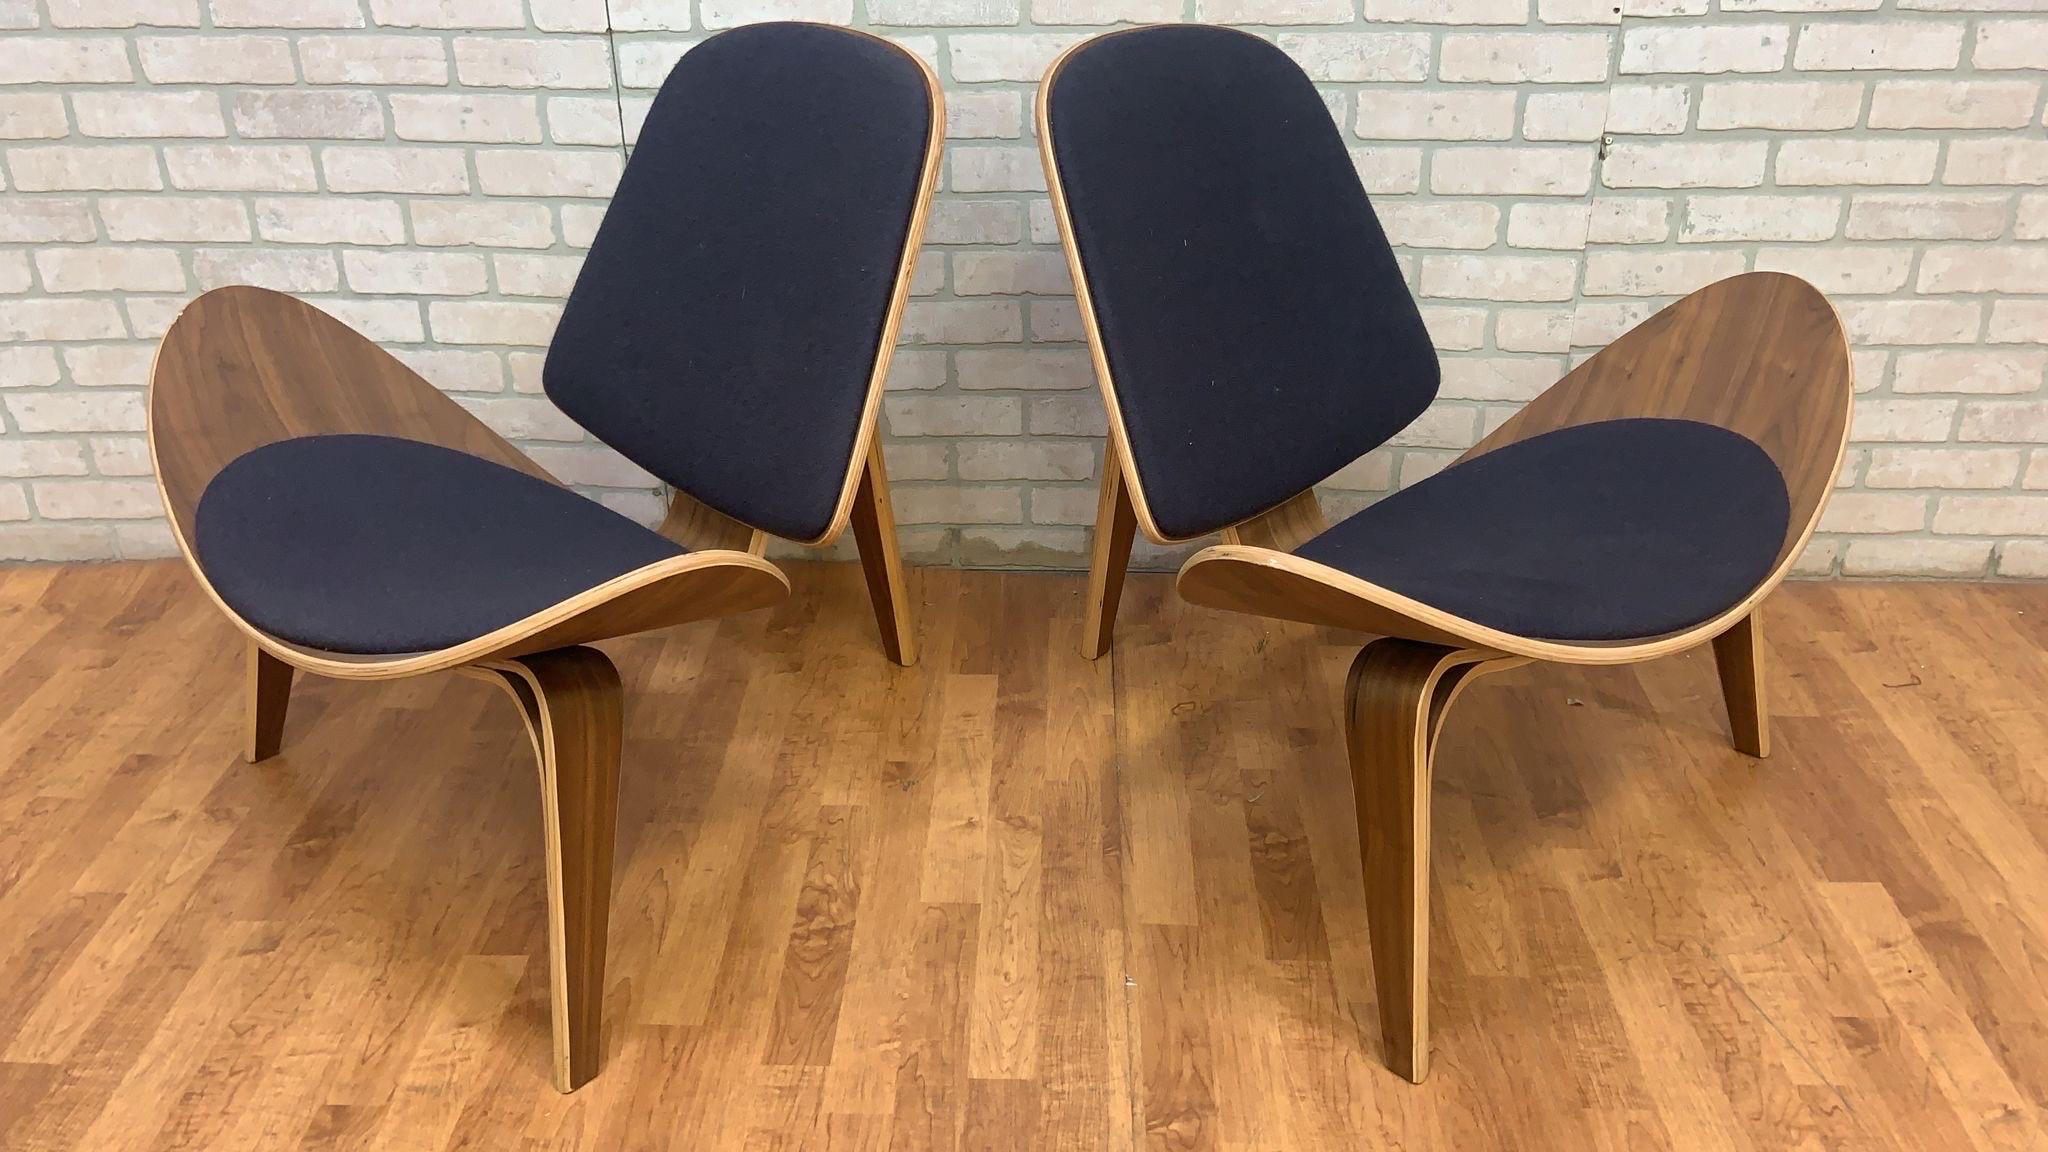 Hand-Crafted Mid-Century Modern Hans Wegner Style Bent Plywood 3 Leg Shell Chairs, Pair For Sale